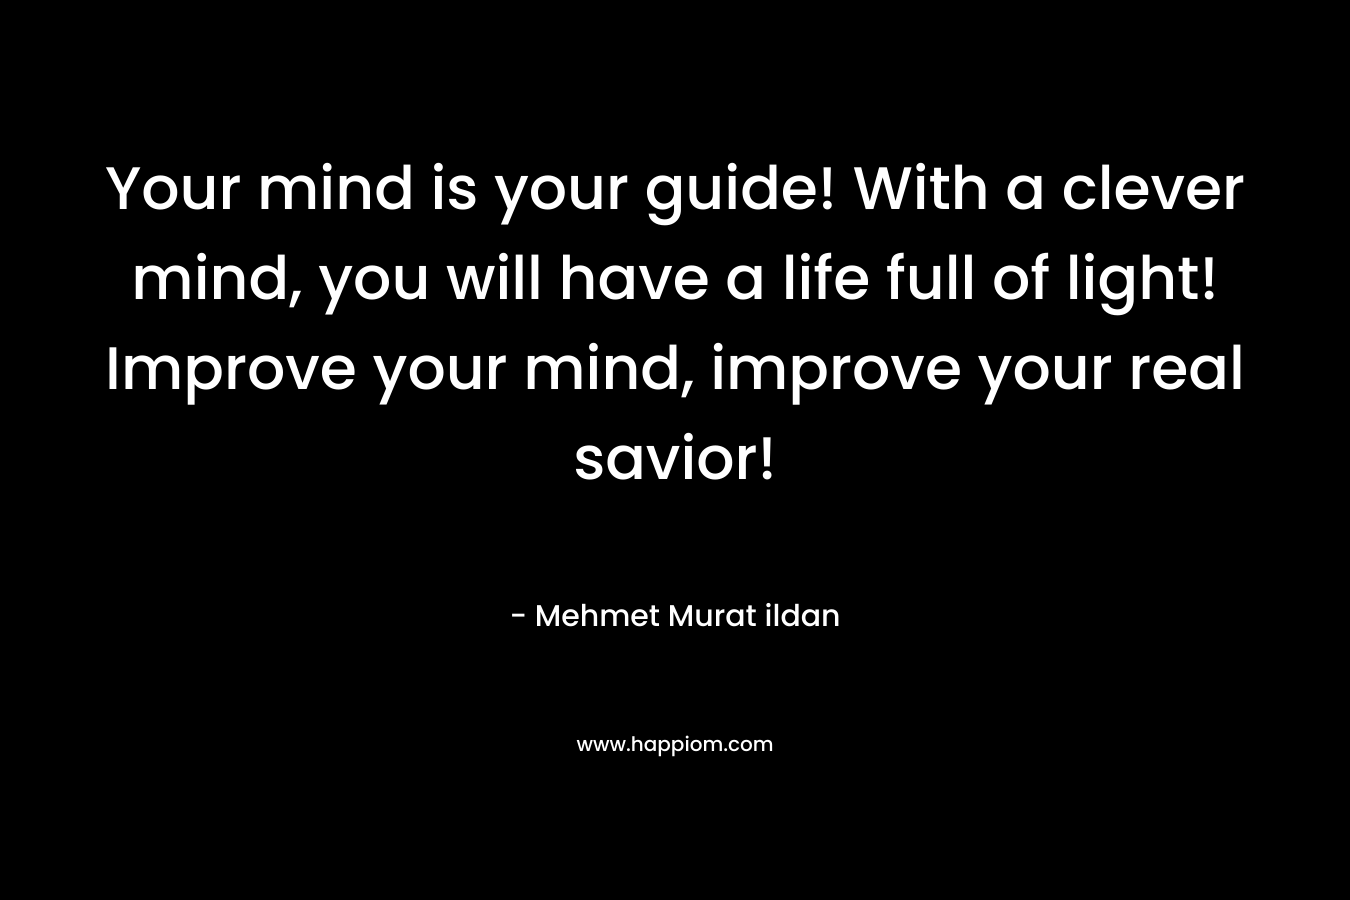 Your mind is your guide! With a clever mind, you will have a life full of light! Improve your mind, improve your real savior!